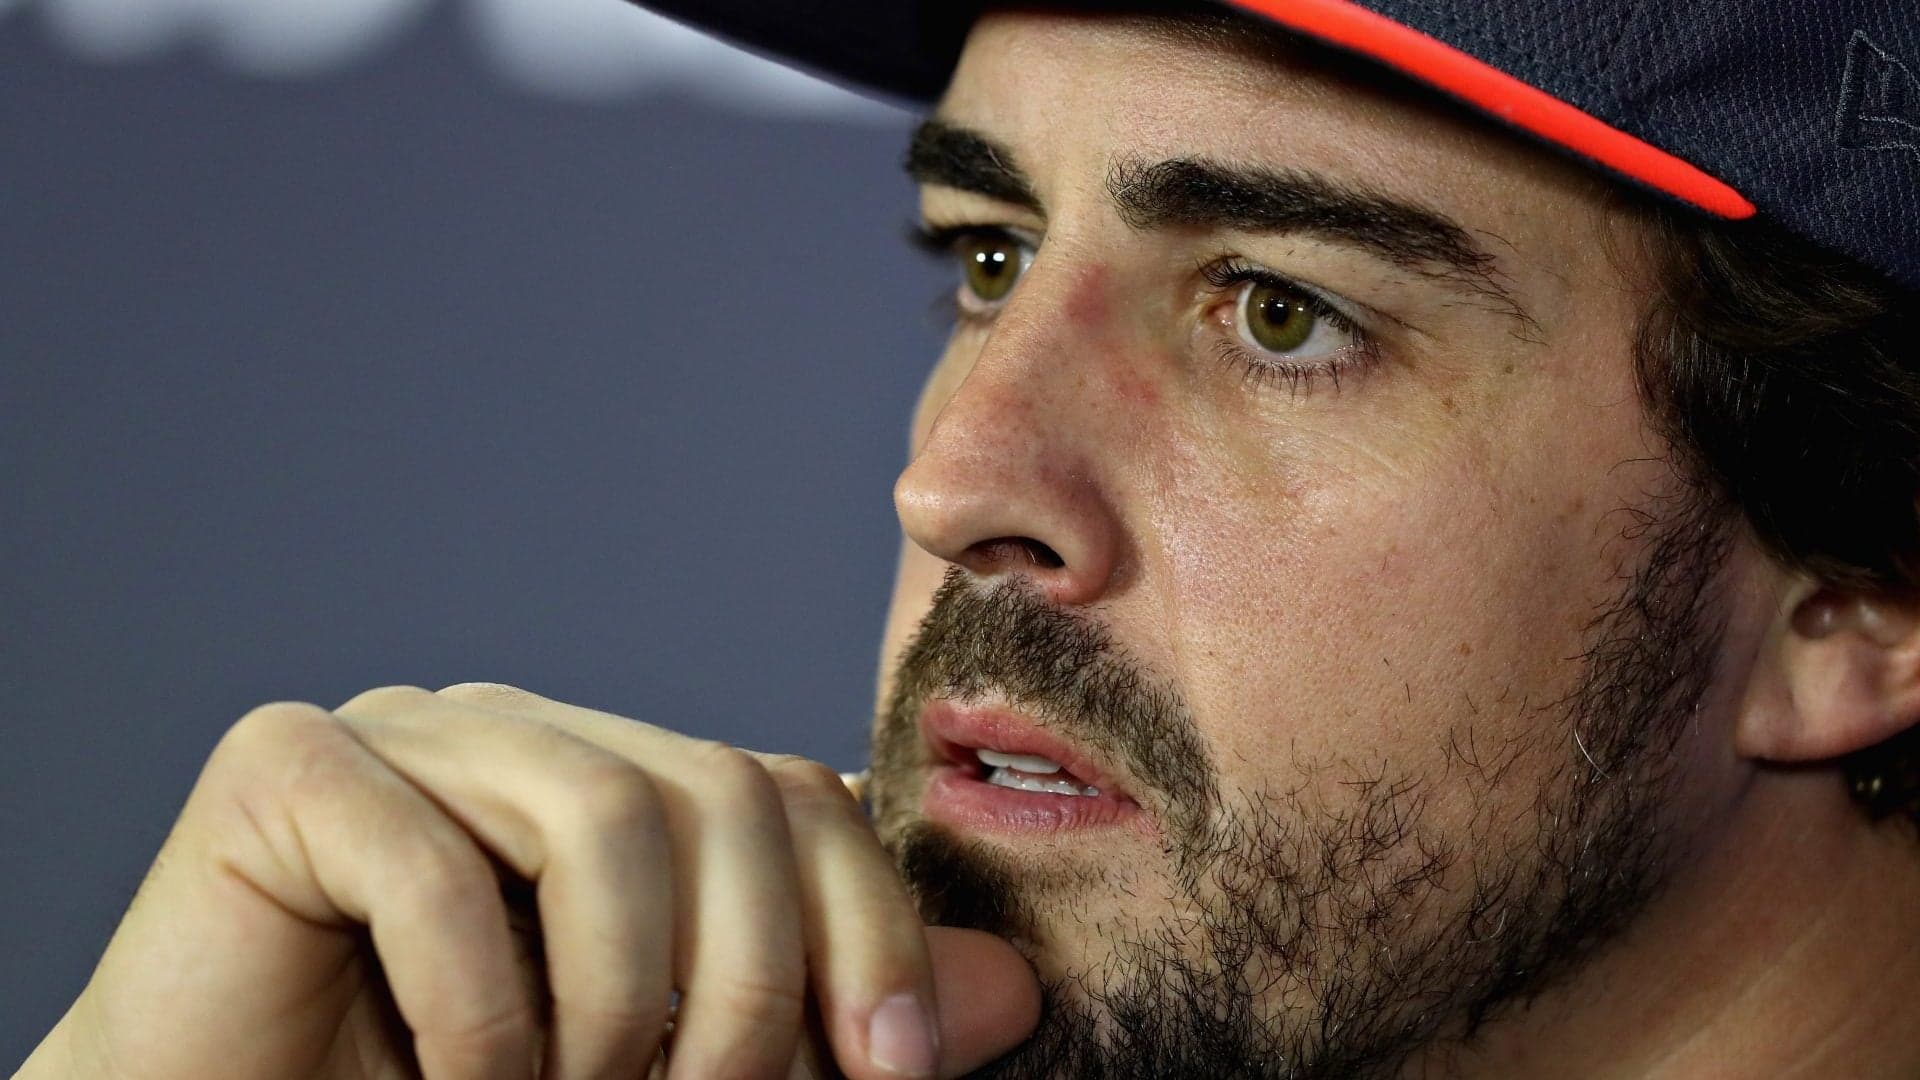 F1 Champ Fernando Alonso May Have His Eyes on NASCAR